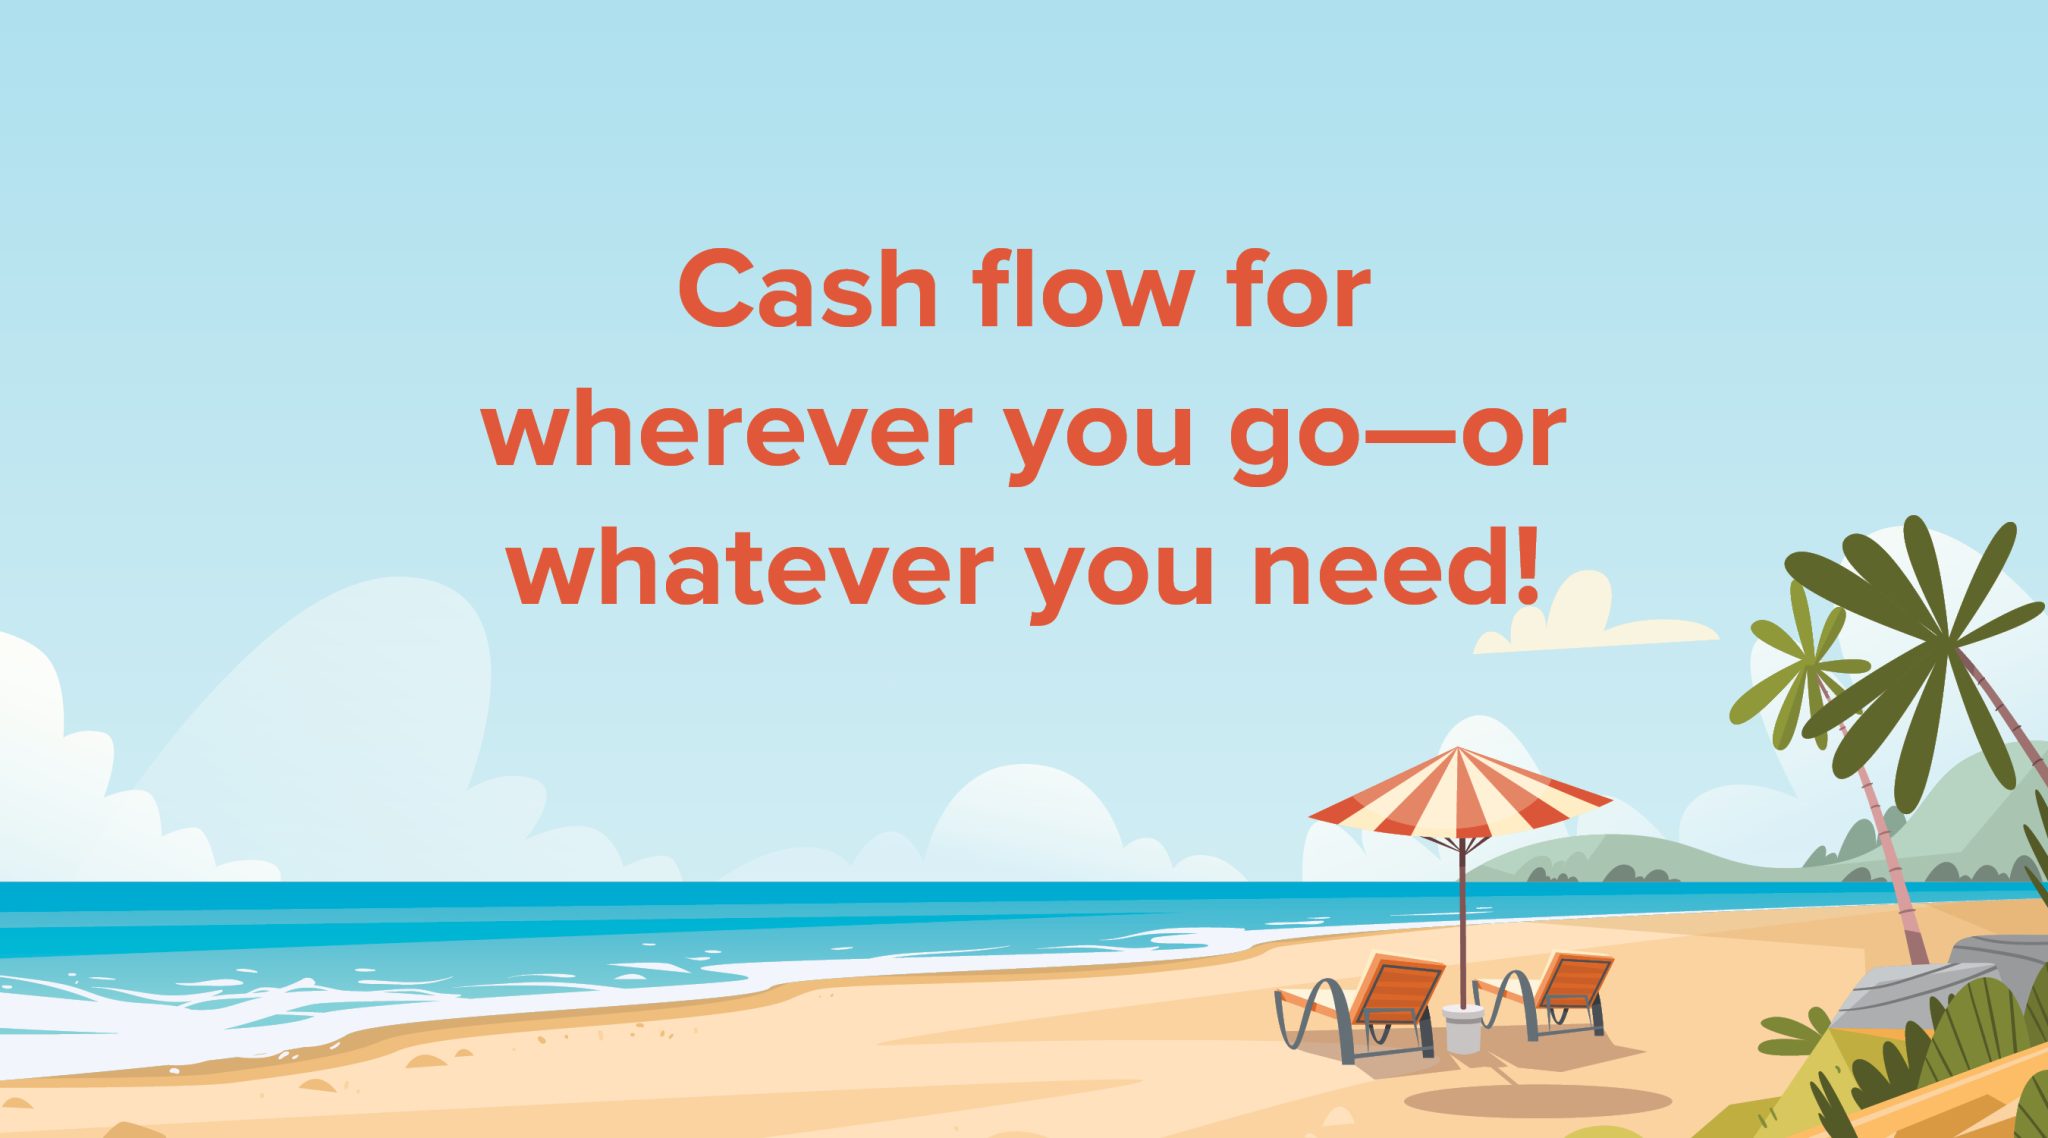 cash flow for wherever you go, or whatever you need.